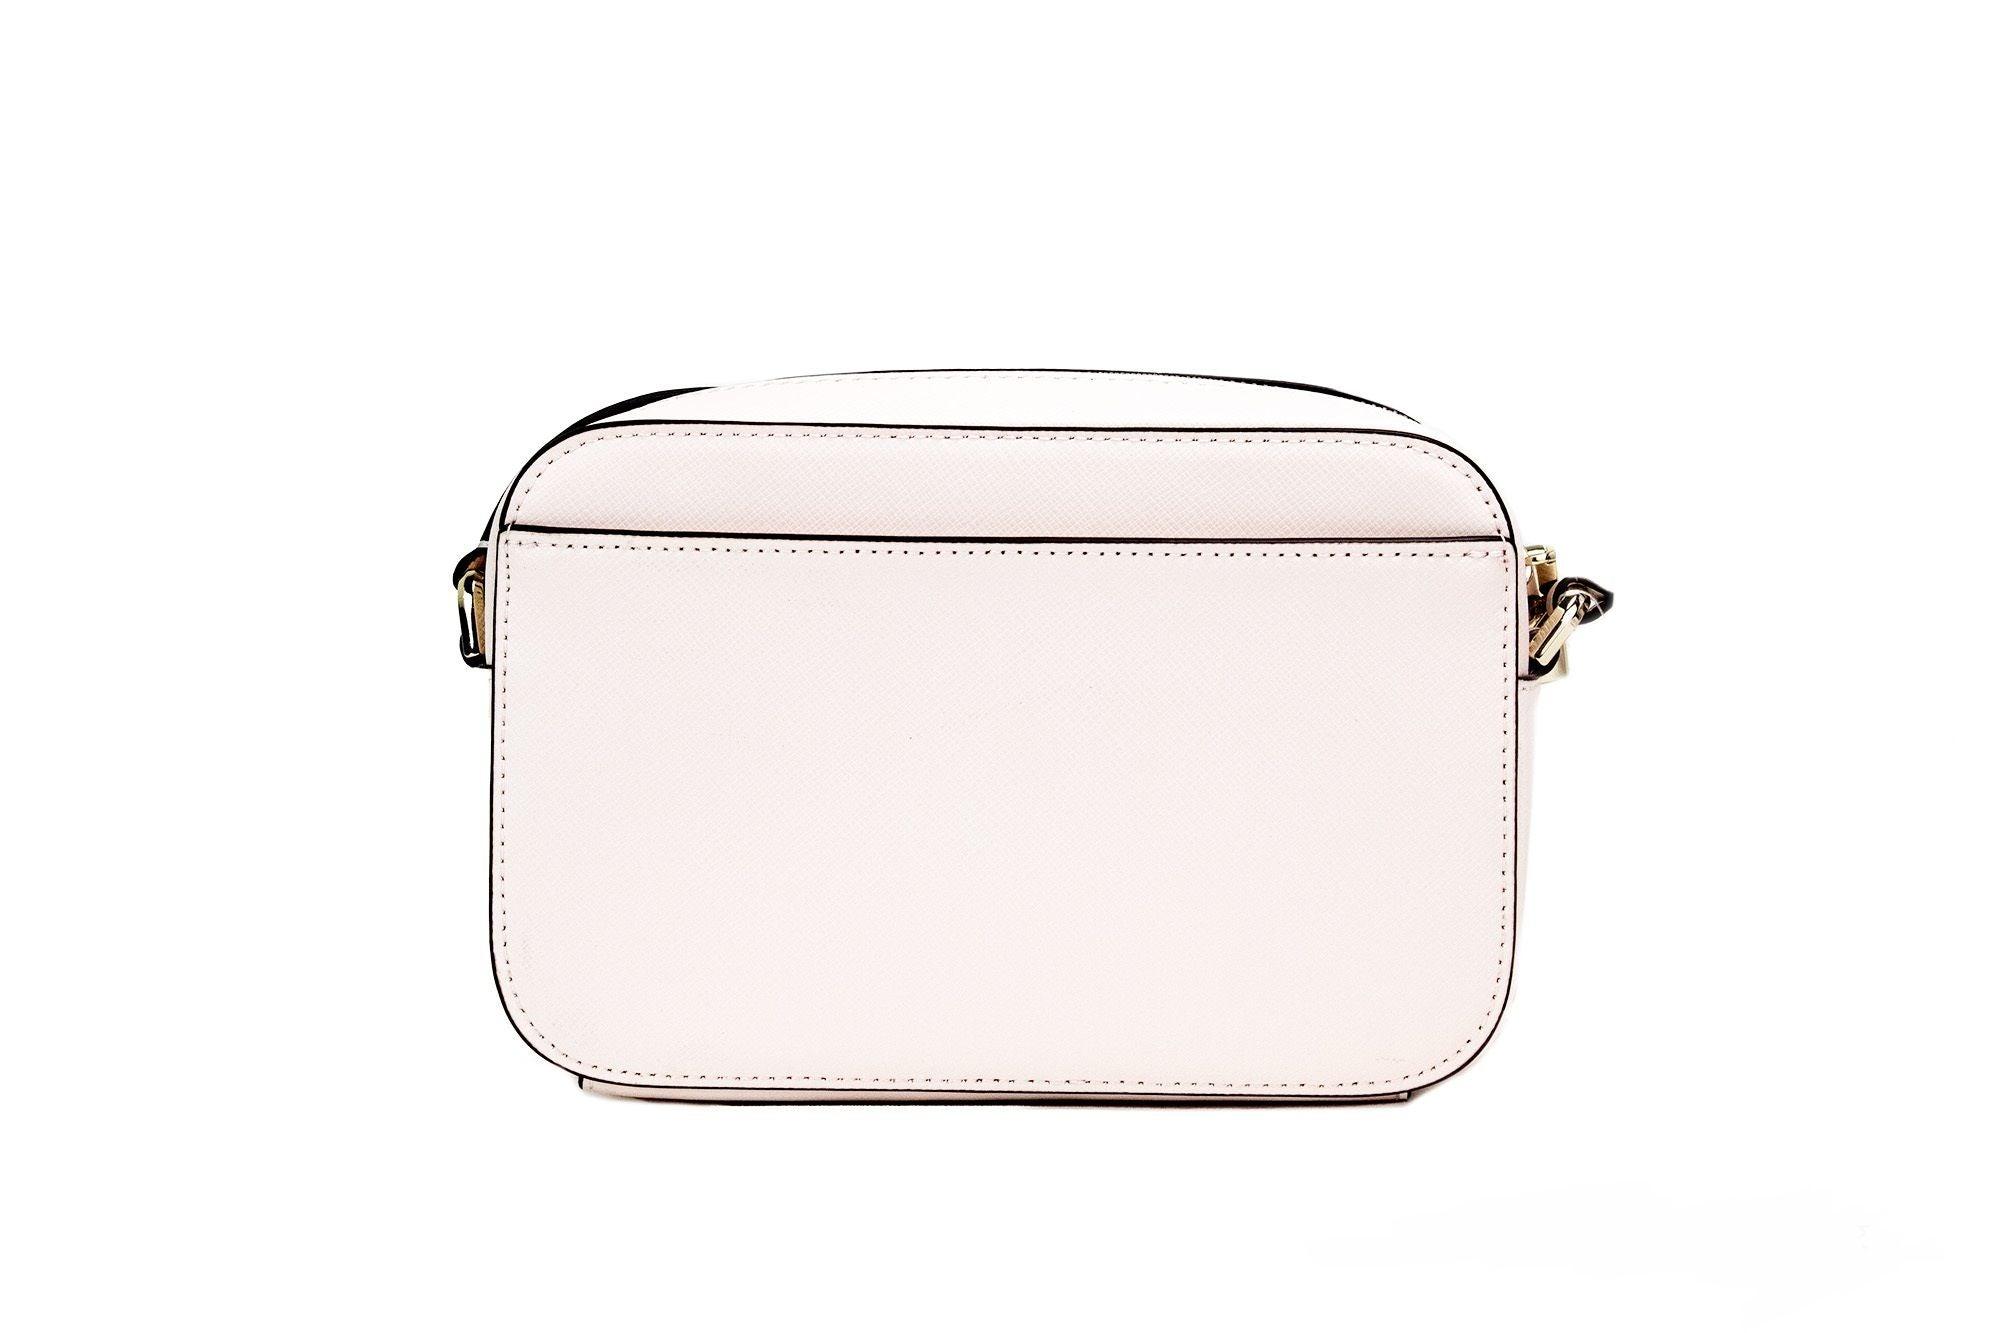 Kate Spade Staci Small Flap Crossbody Bag with Saffiano Leather in